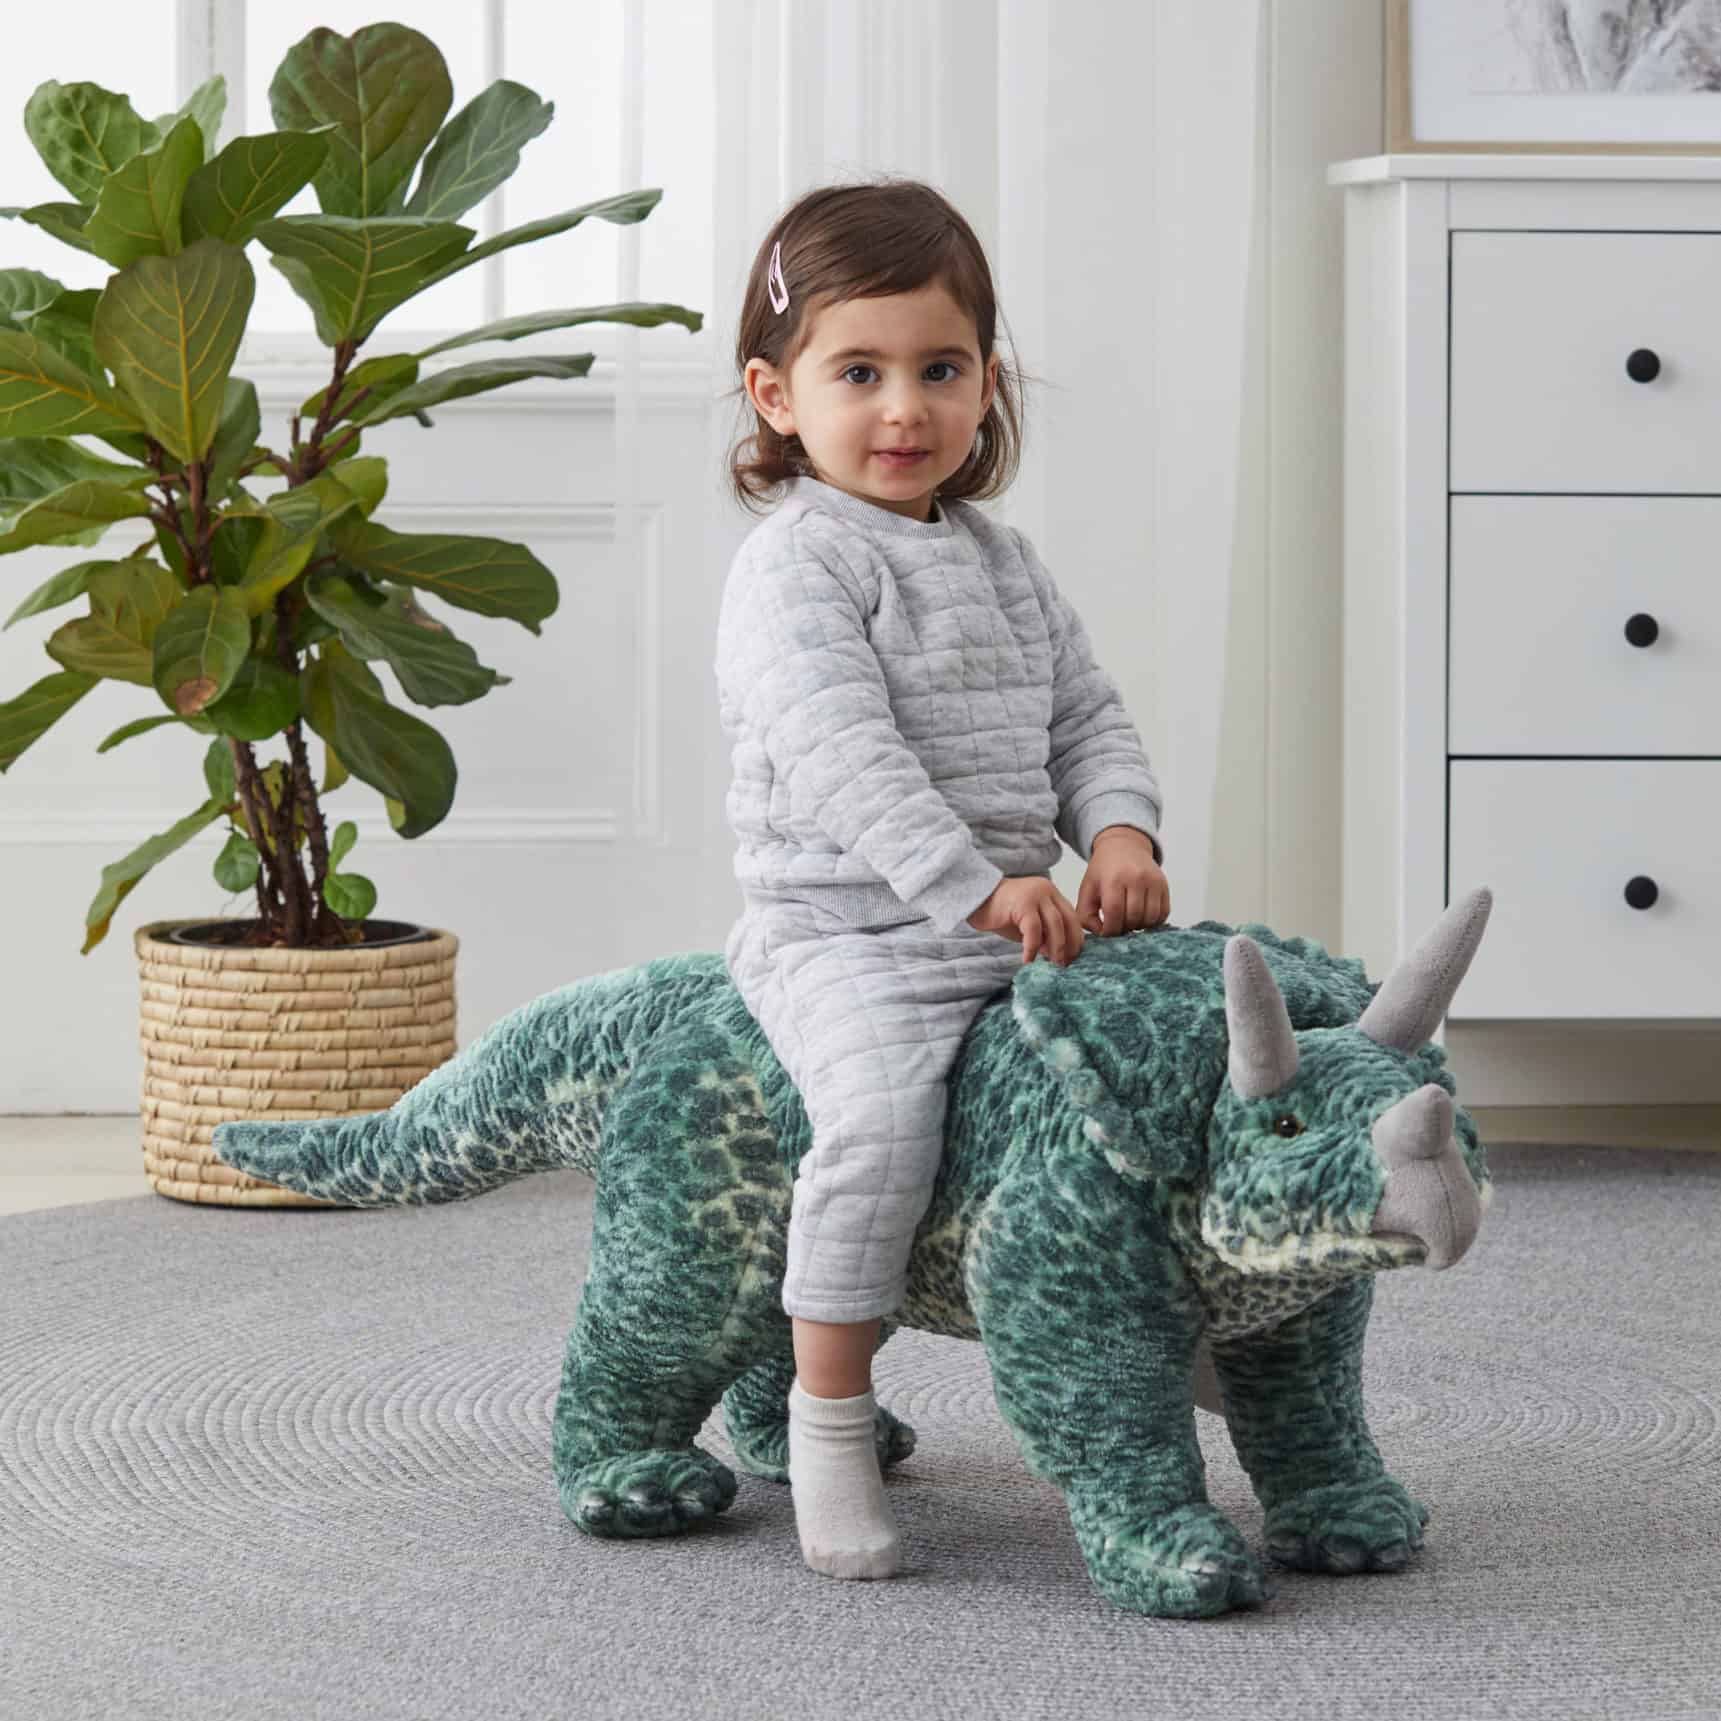 Jiggle & Giggle Large Standing Dino Triceratops